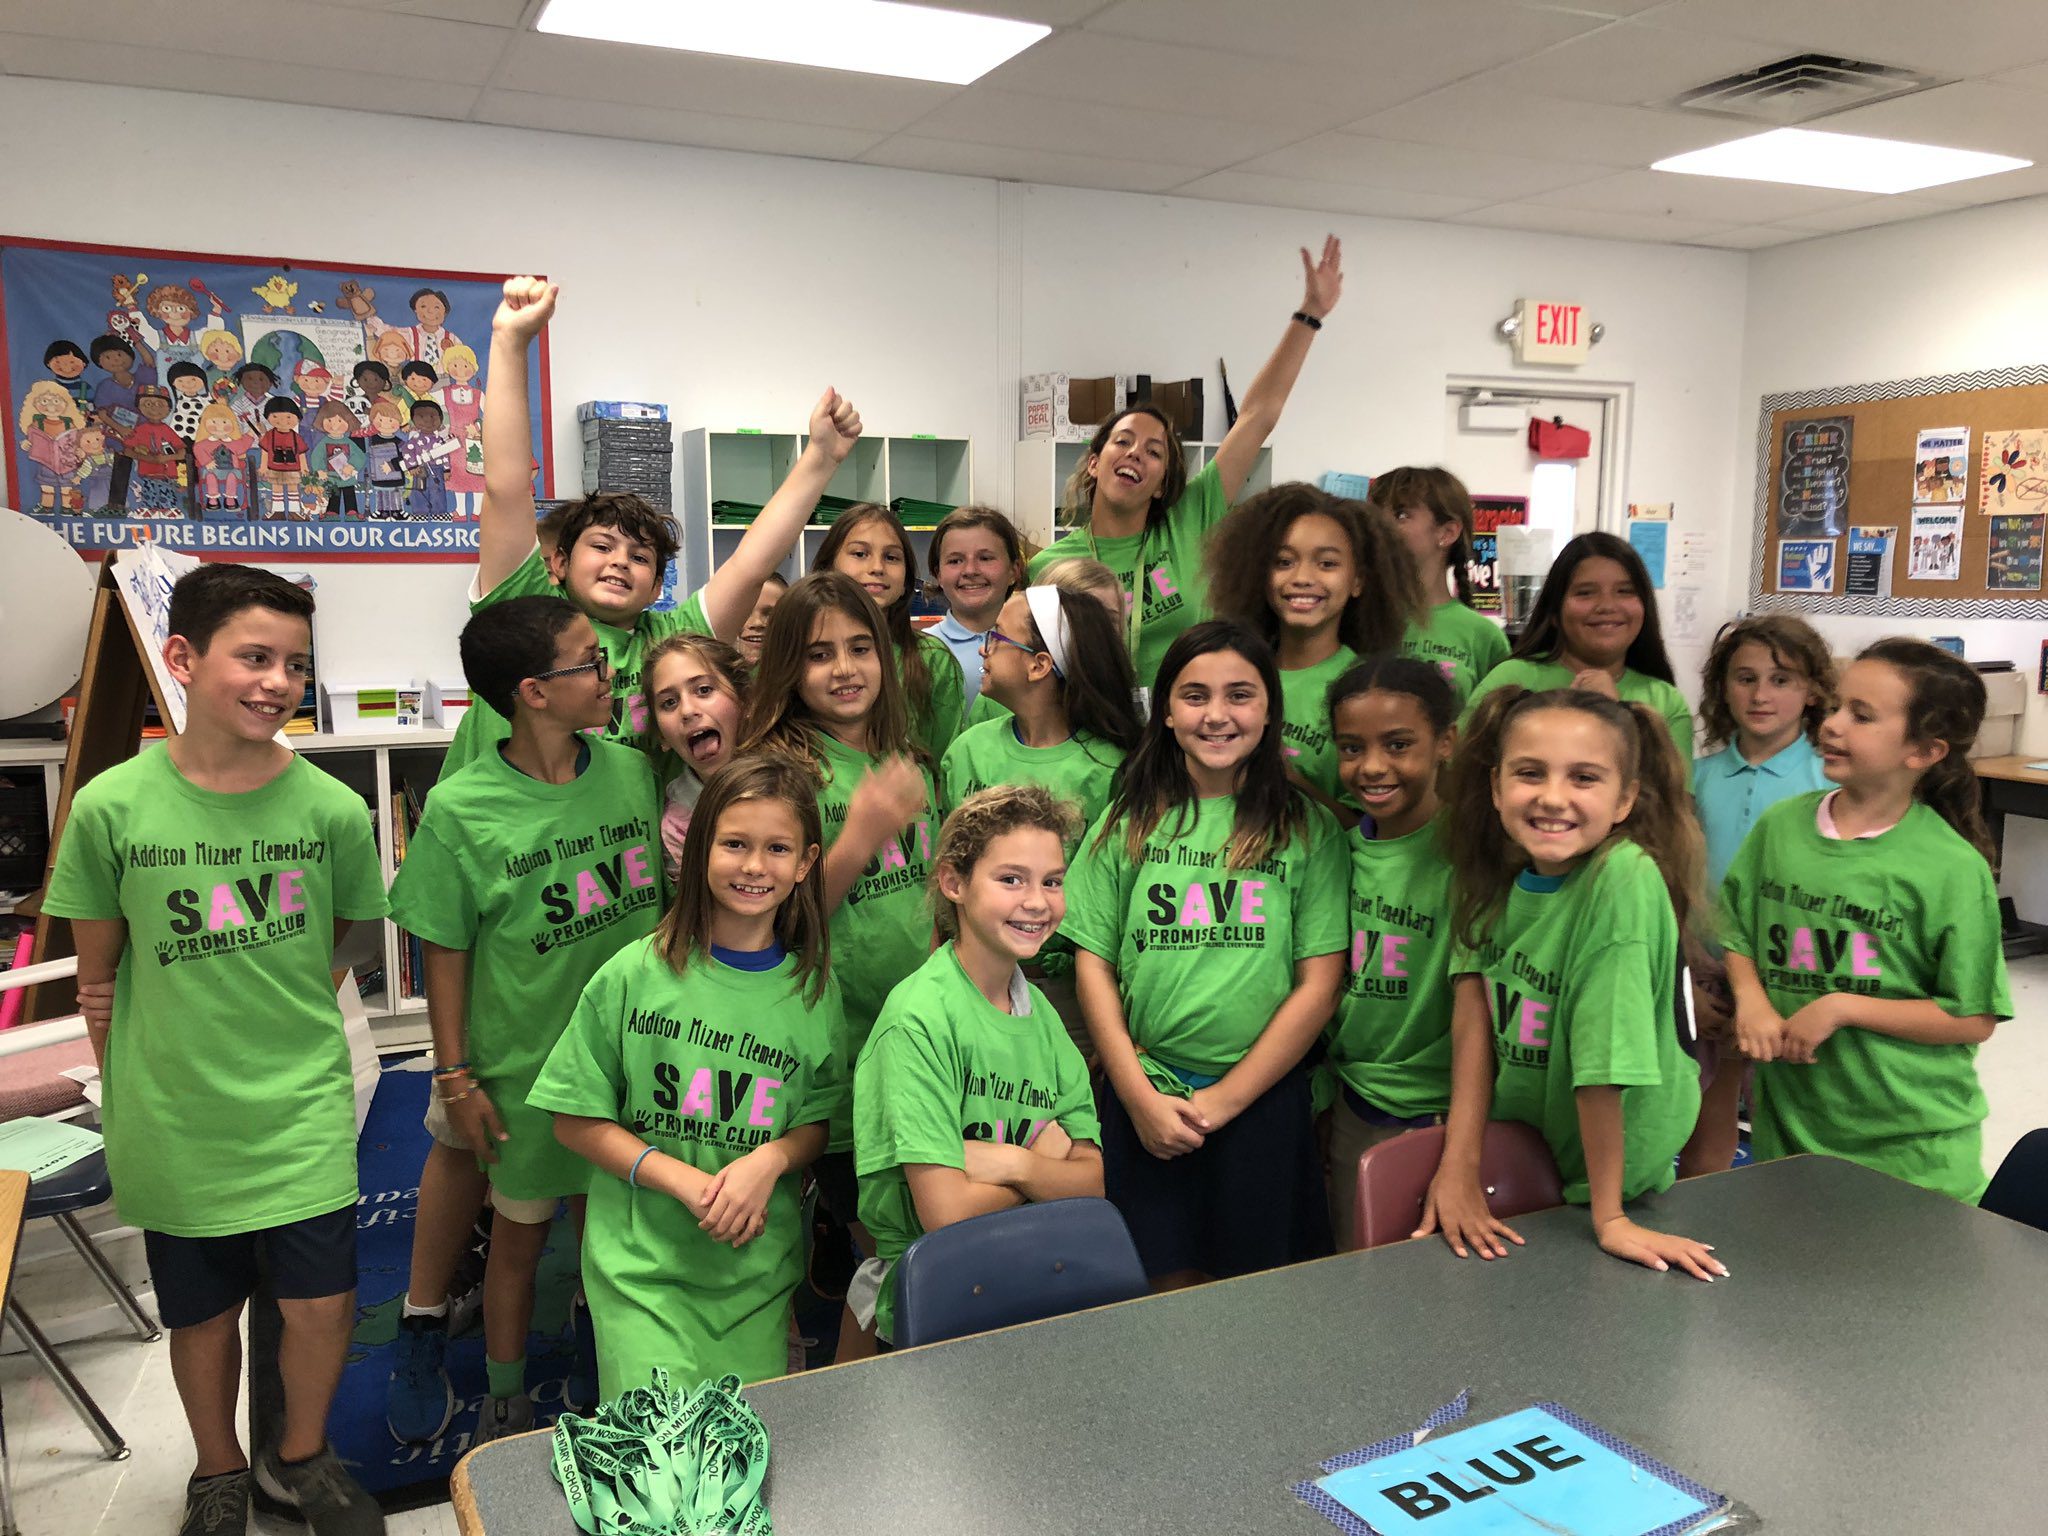 Addison Mintzer SAVE Club shirts great fun group with green